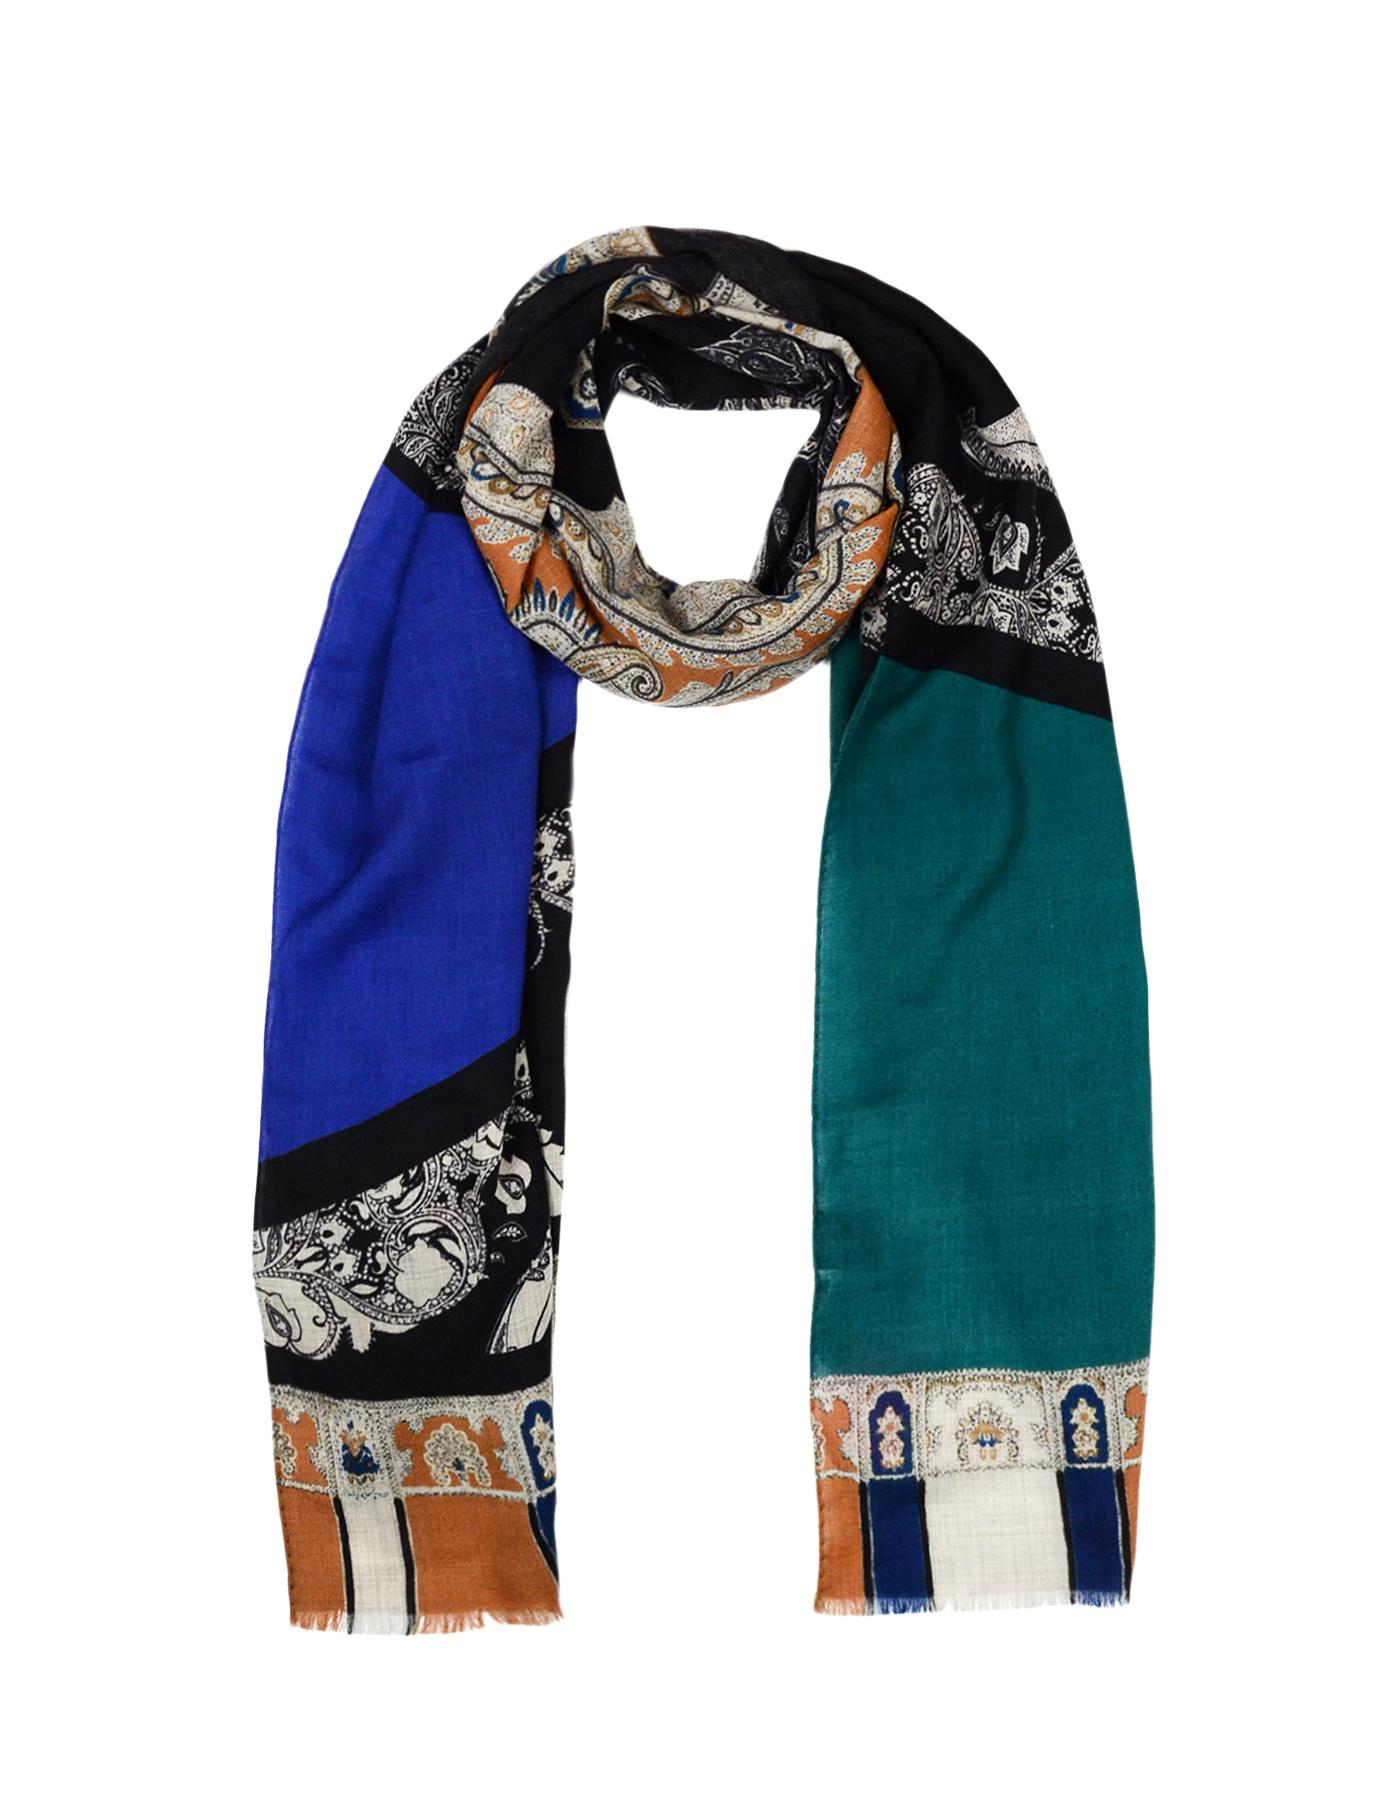 Etro Multi-Color Wool/Yak Printed Scarf

Made In: Italy
Color: Multi-color
Materials: 90% wool, 10% yak
Overall Condition: Excellent pre-owned condition 

Measurements: 
26